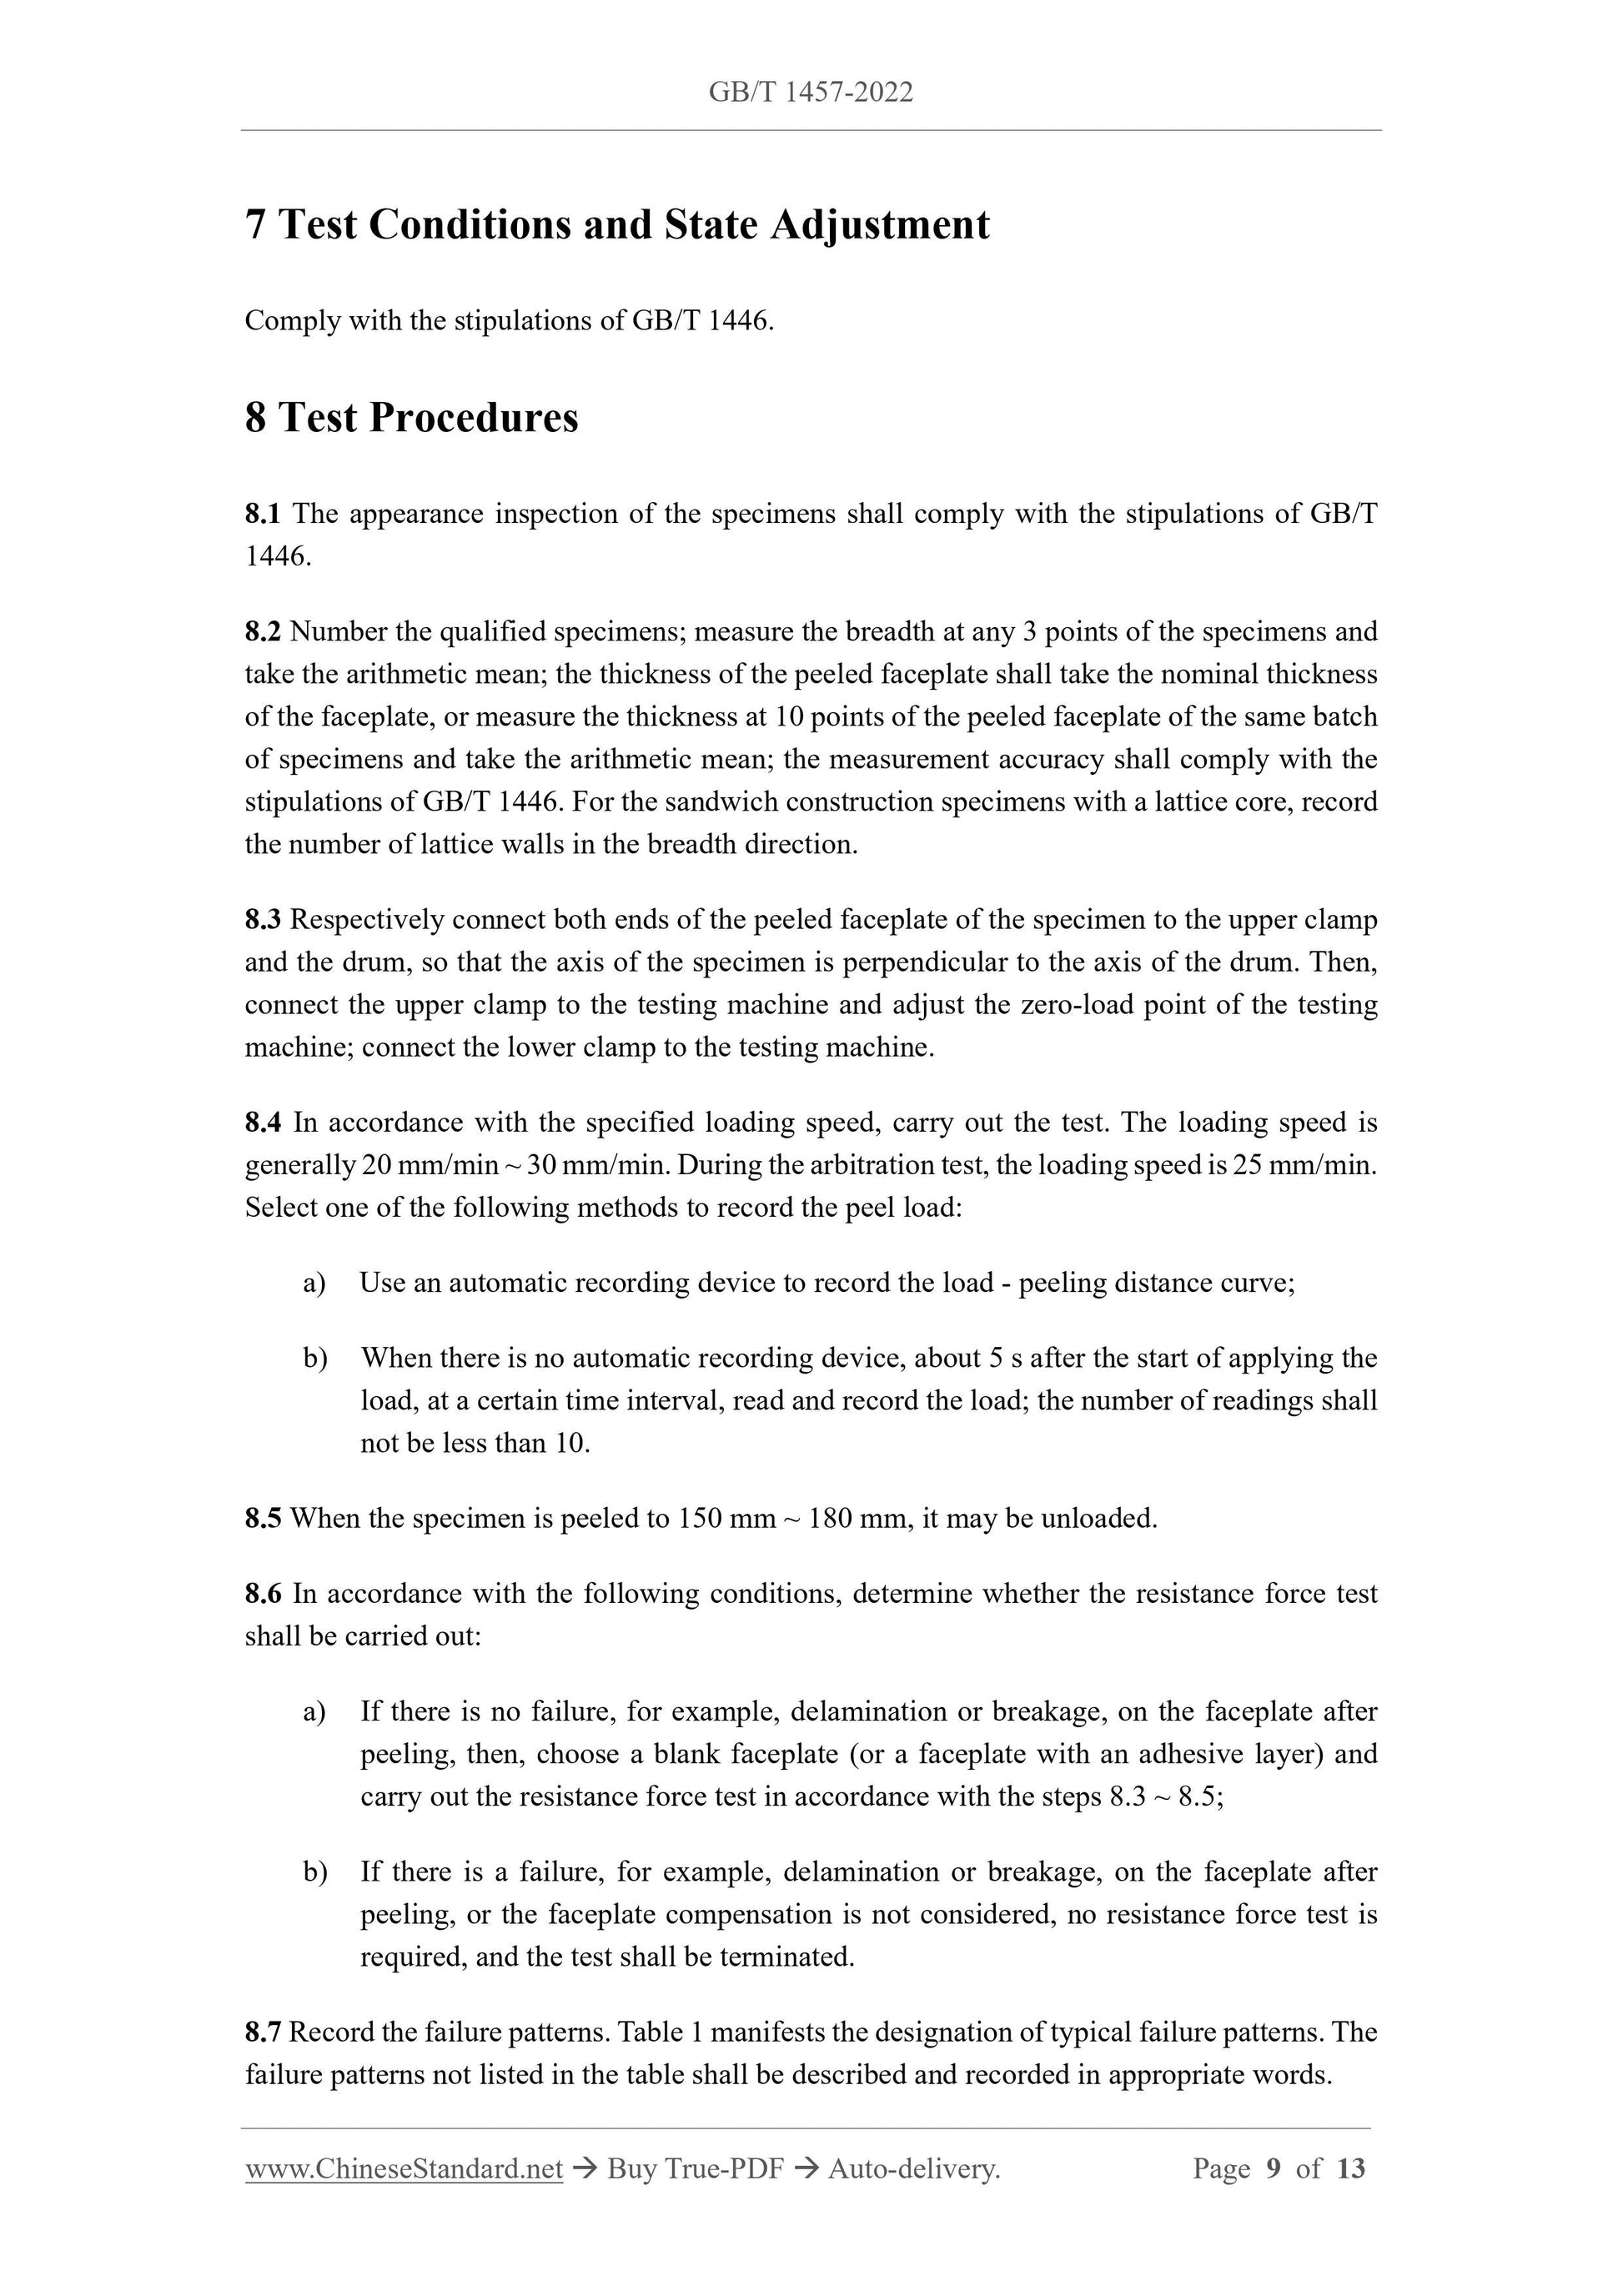 GB/T 1457-2022 Page 5